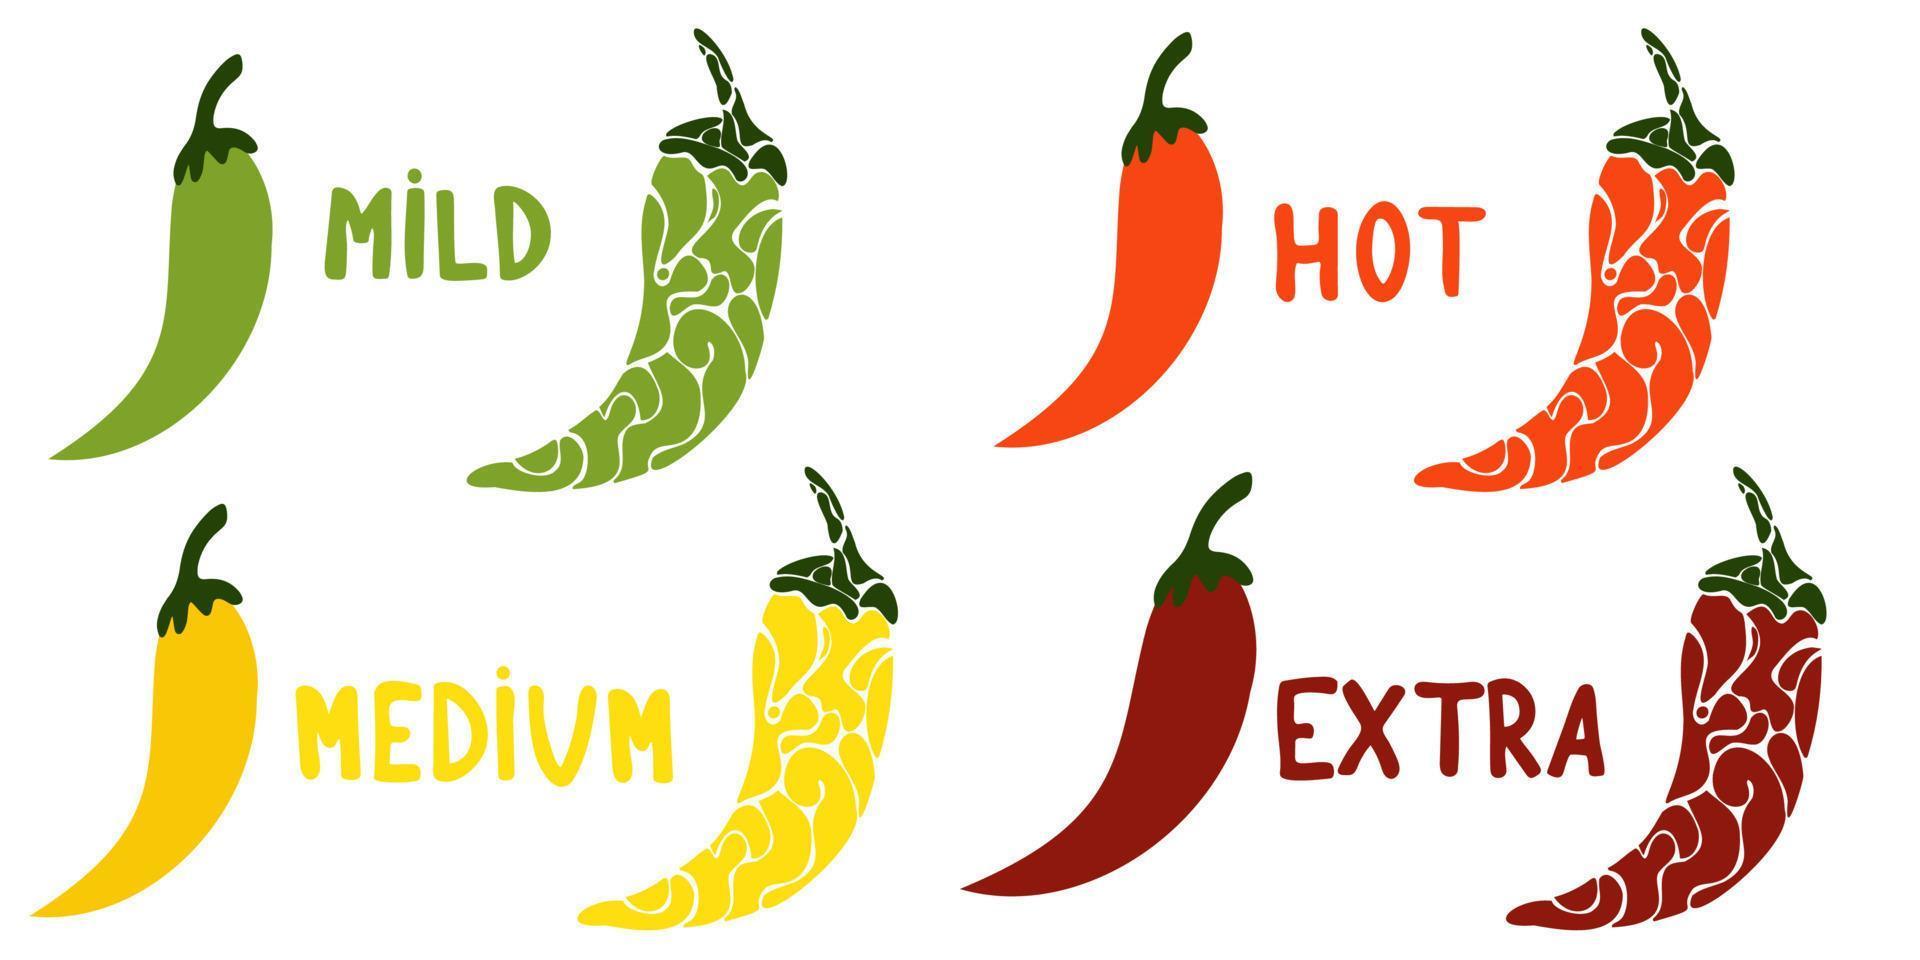 Chili Pepper Heat Unit scale or measurement infographic design template with hot chili pepper on white background. Chili pepper spicy food level icon collection, mild, medium, hot and extra level. vector